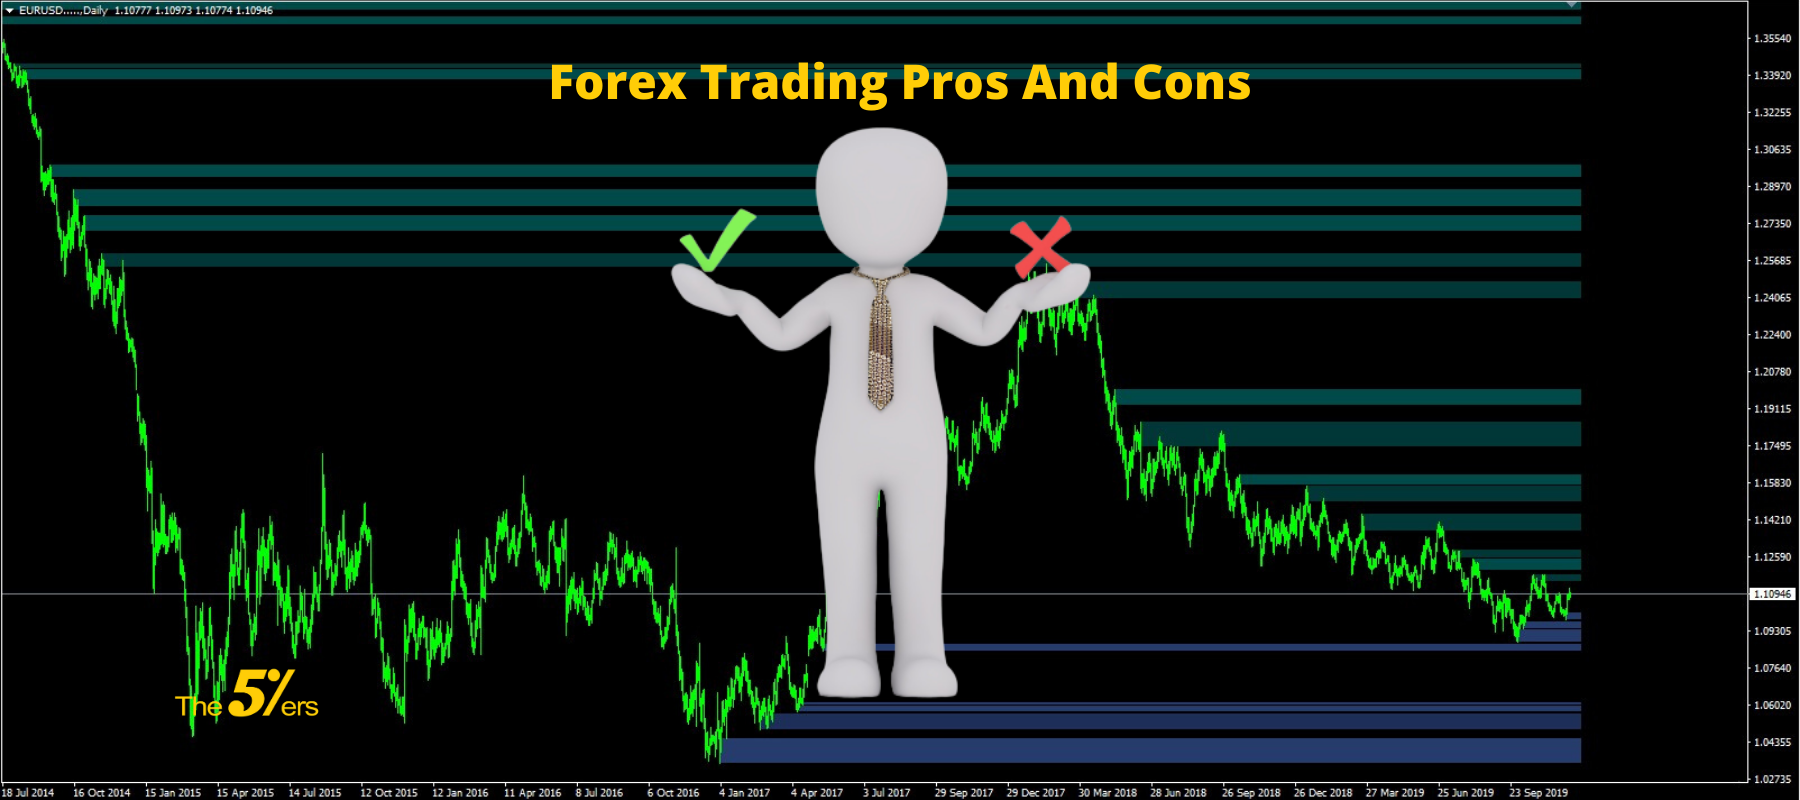 Pros and cons of forex trading